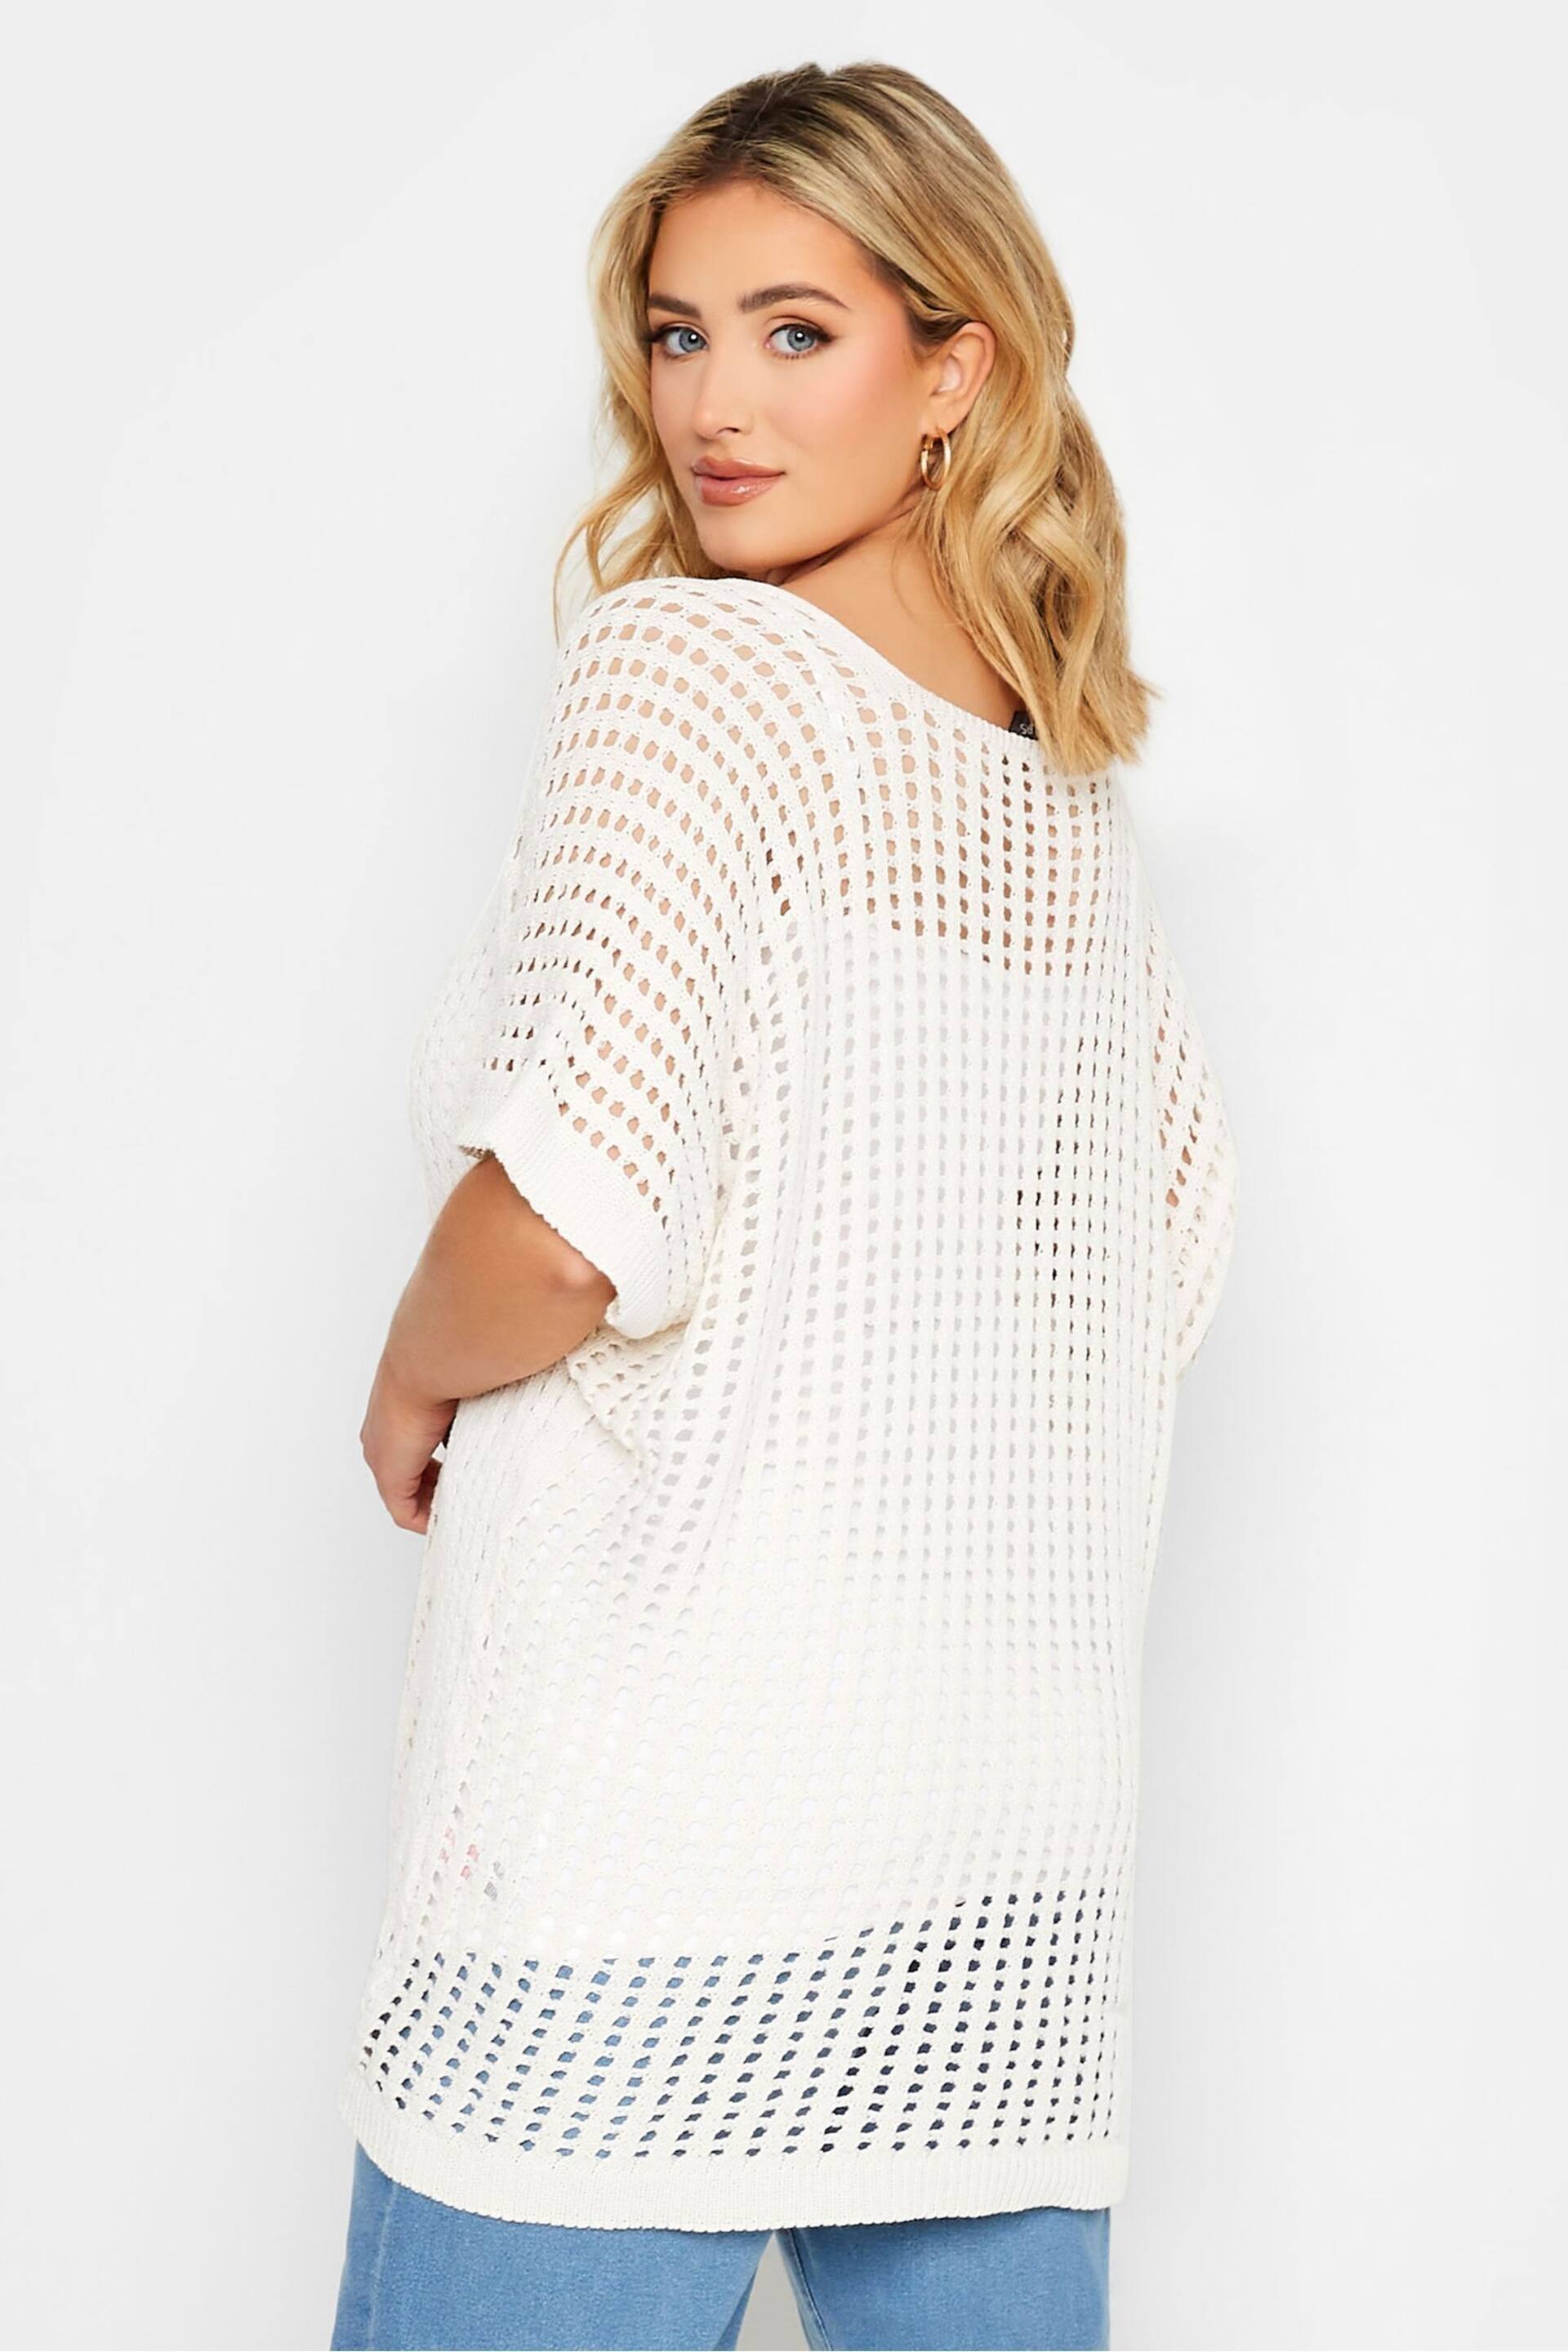 Yours Curve Cream Crochet Boxy Cover-Up - Image 2 of 5